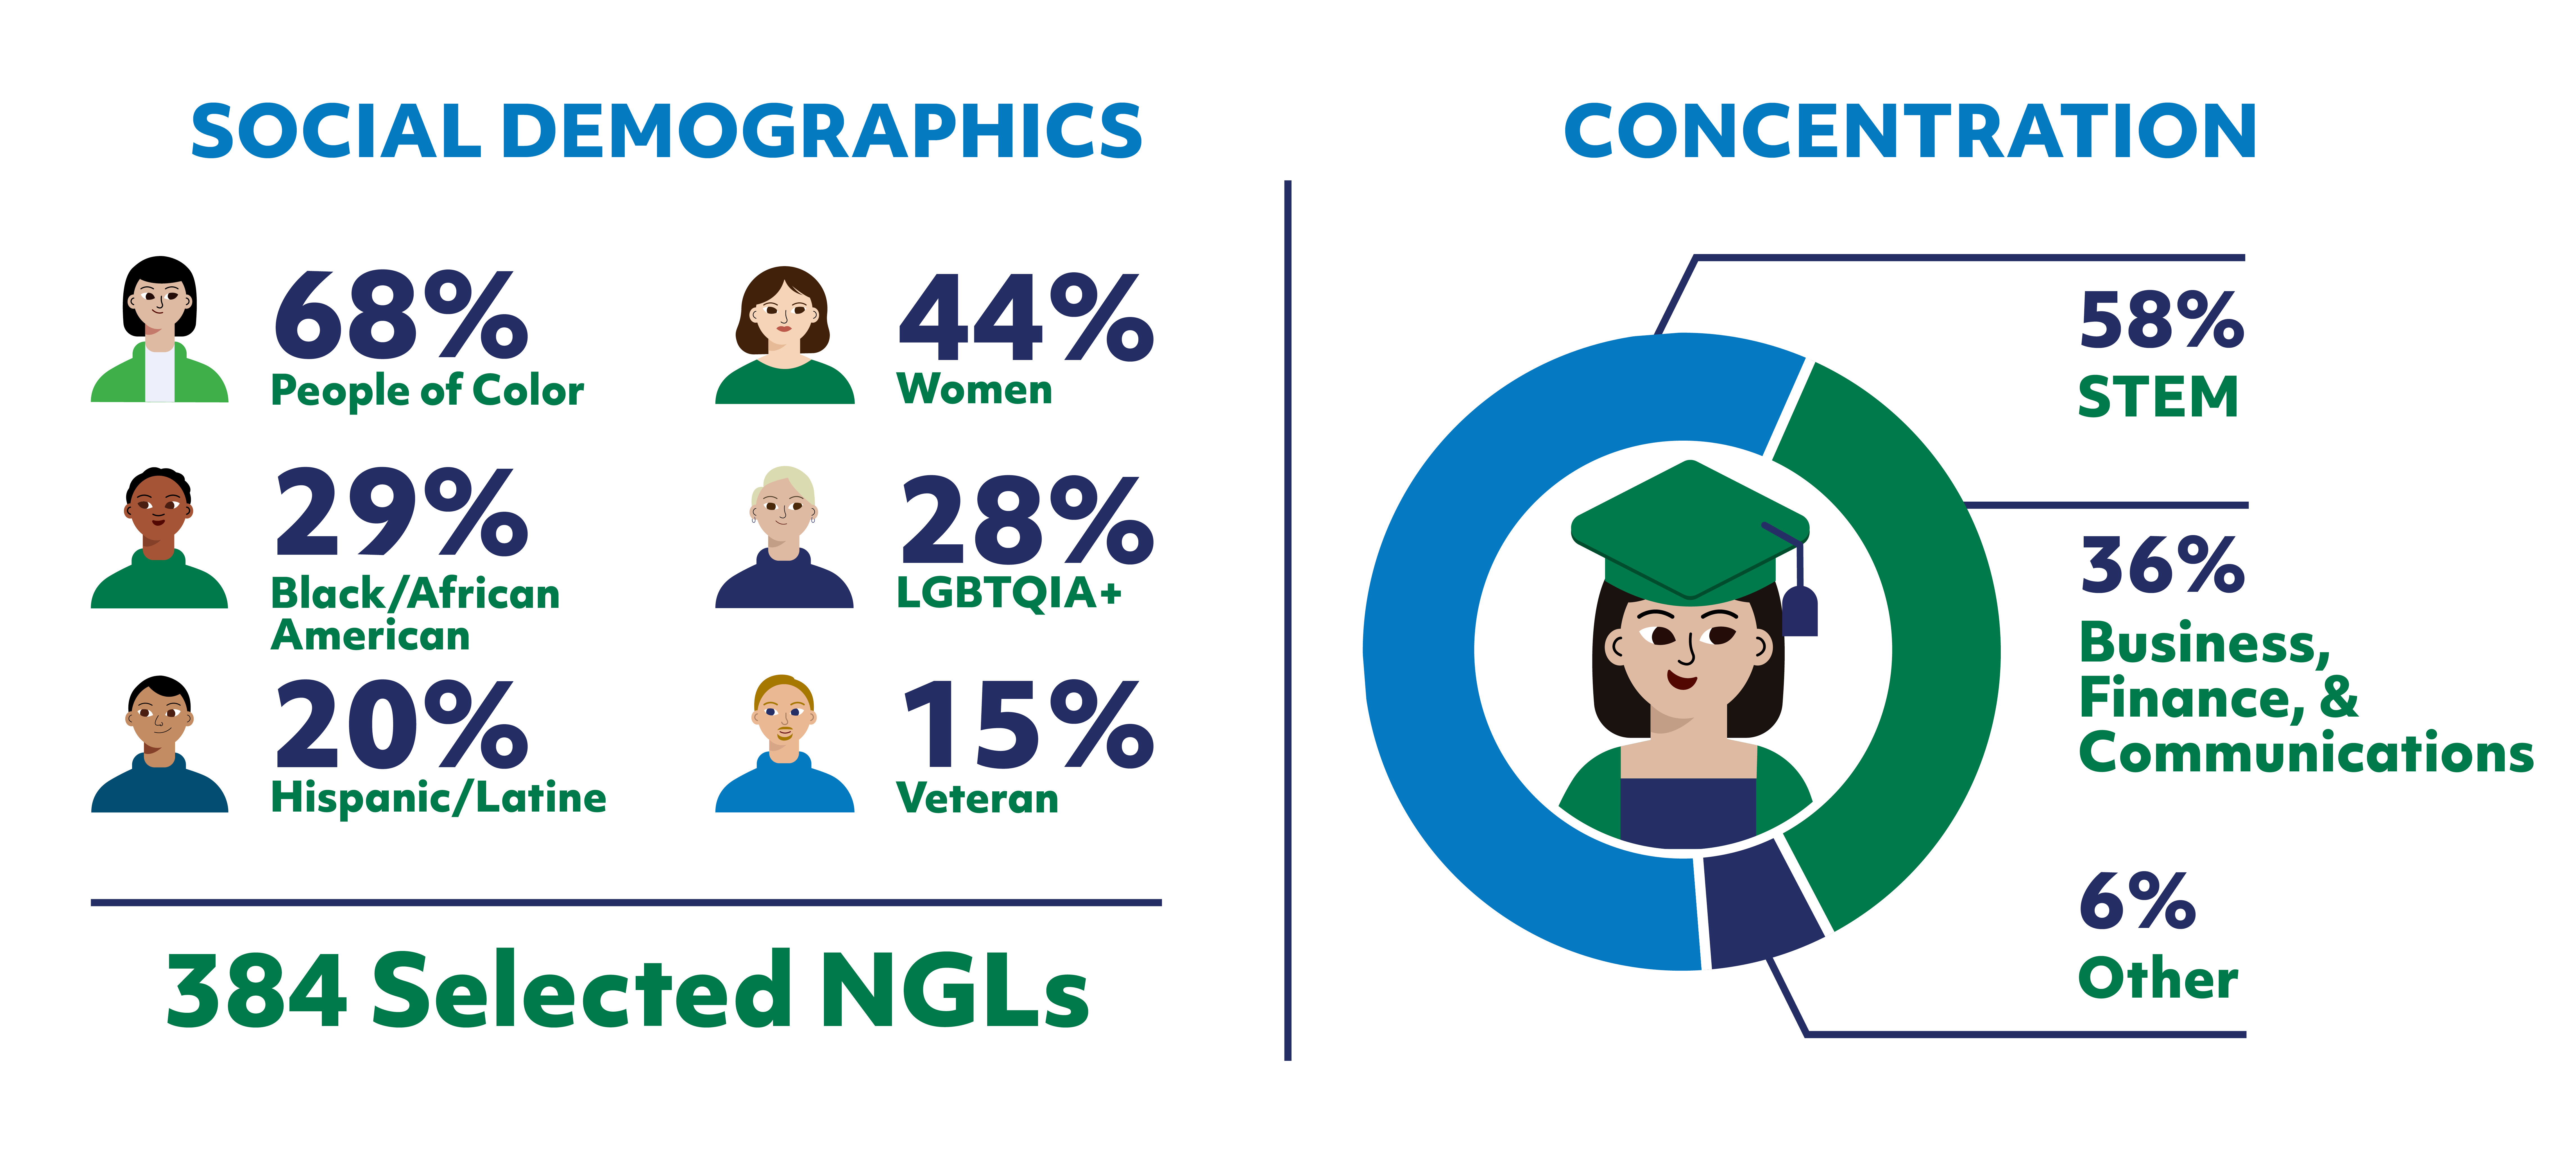 Social Demographics: 68% People of Color, 44% Women, 29% Black/African American, 28% LGBTQIA+, 20% Hispanic/Latine, and 15% Veteran=384 Select NGLs. Concentration: 58% STEM; 36% Business, Finance, & Communications; 6% Other.